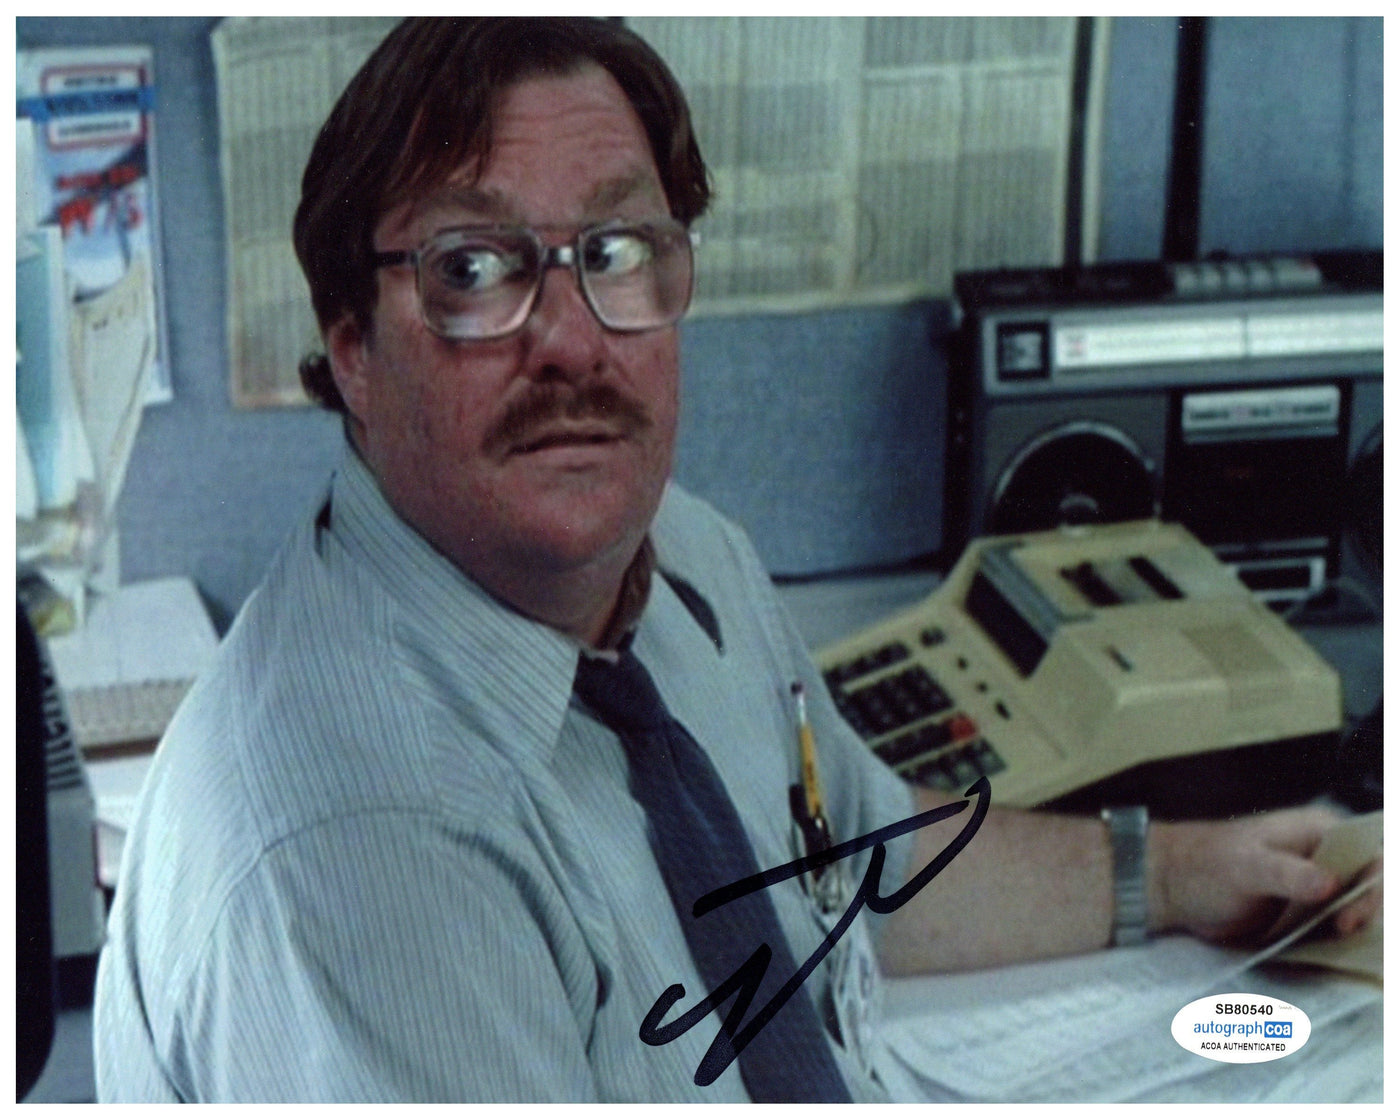 Stephen Root Signed 8x10 Photo Office Space Autographed ACOA #5